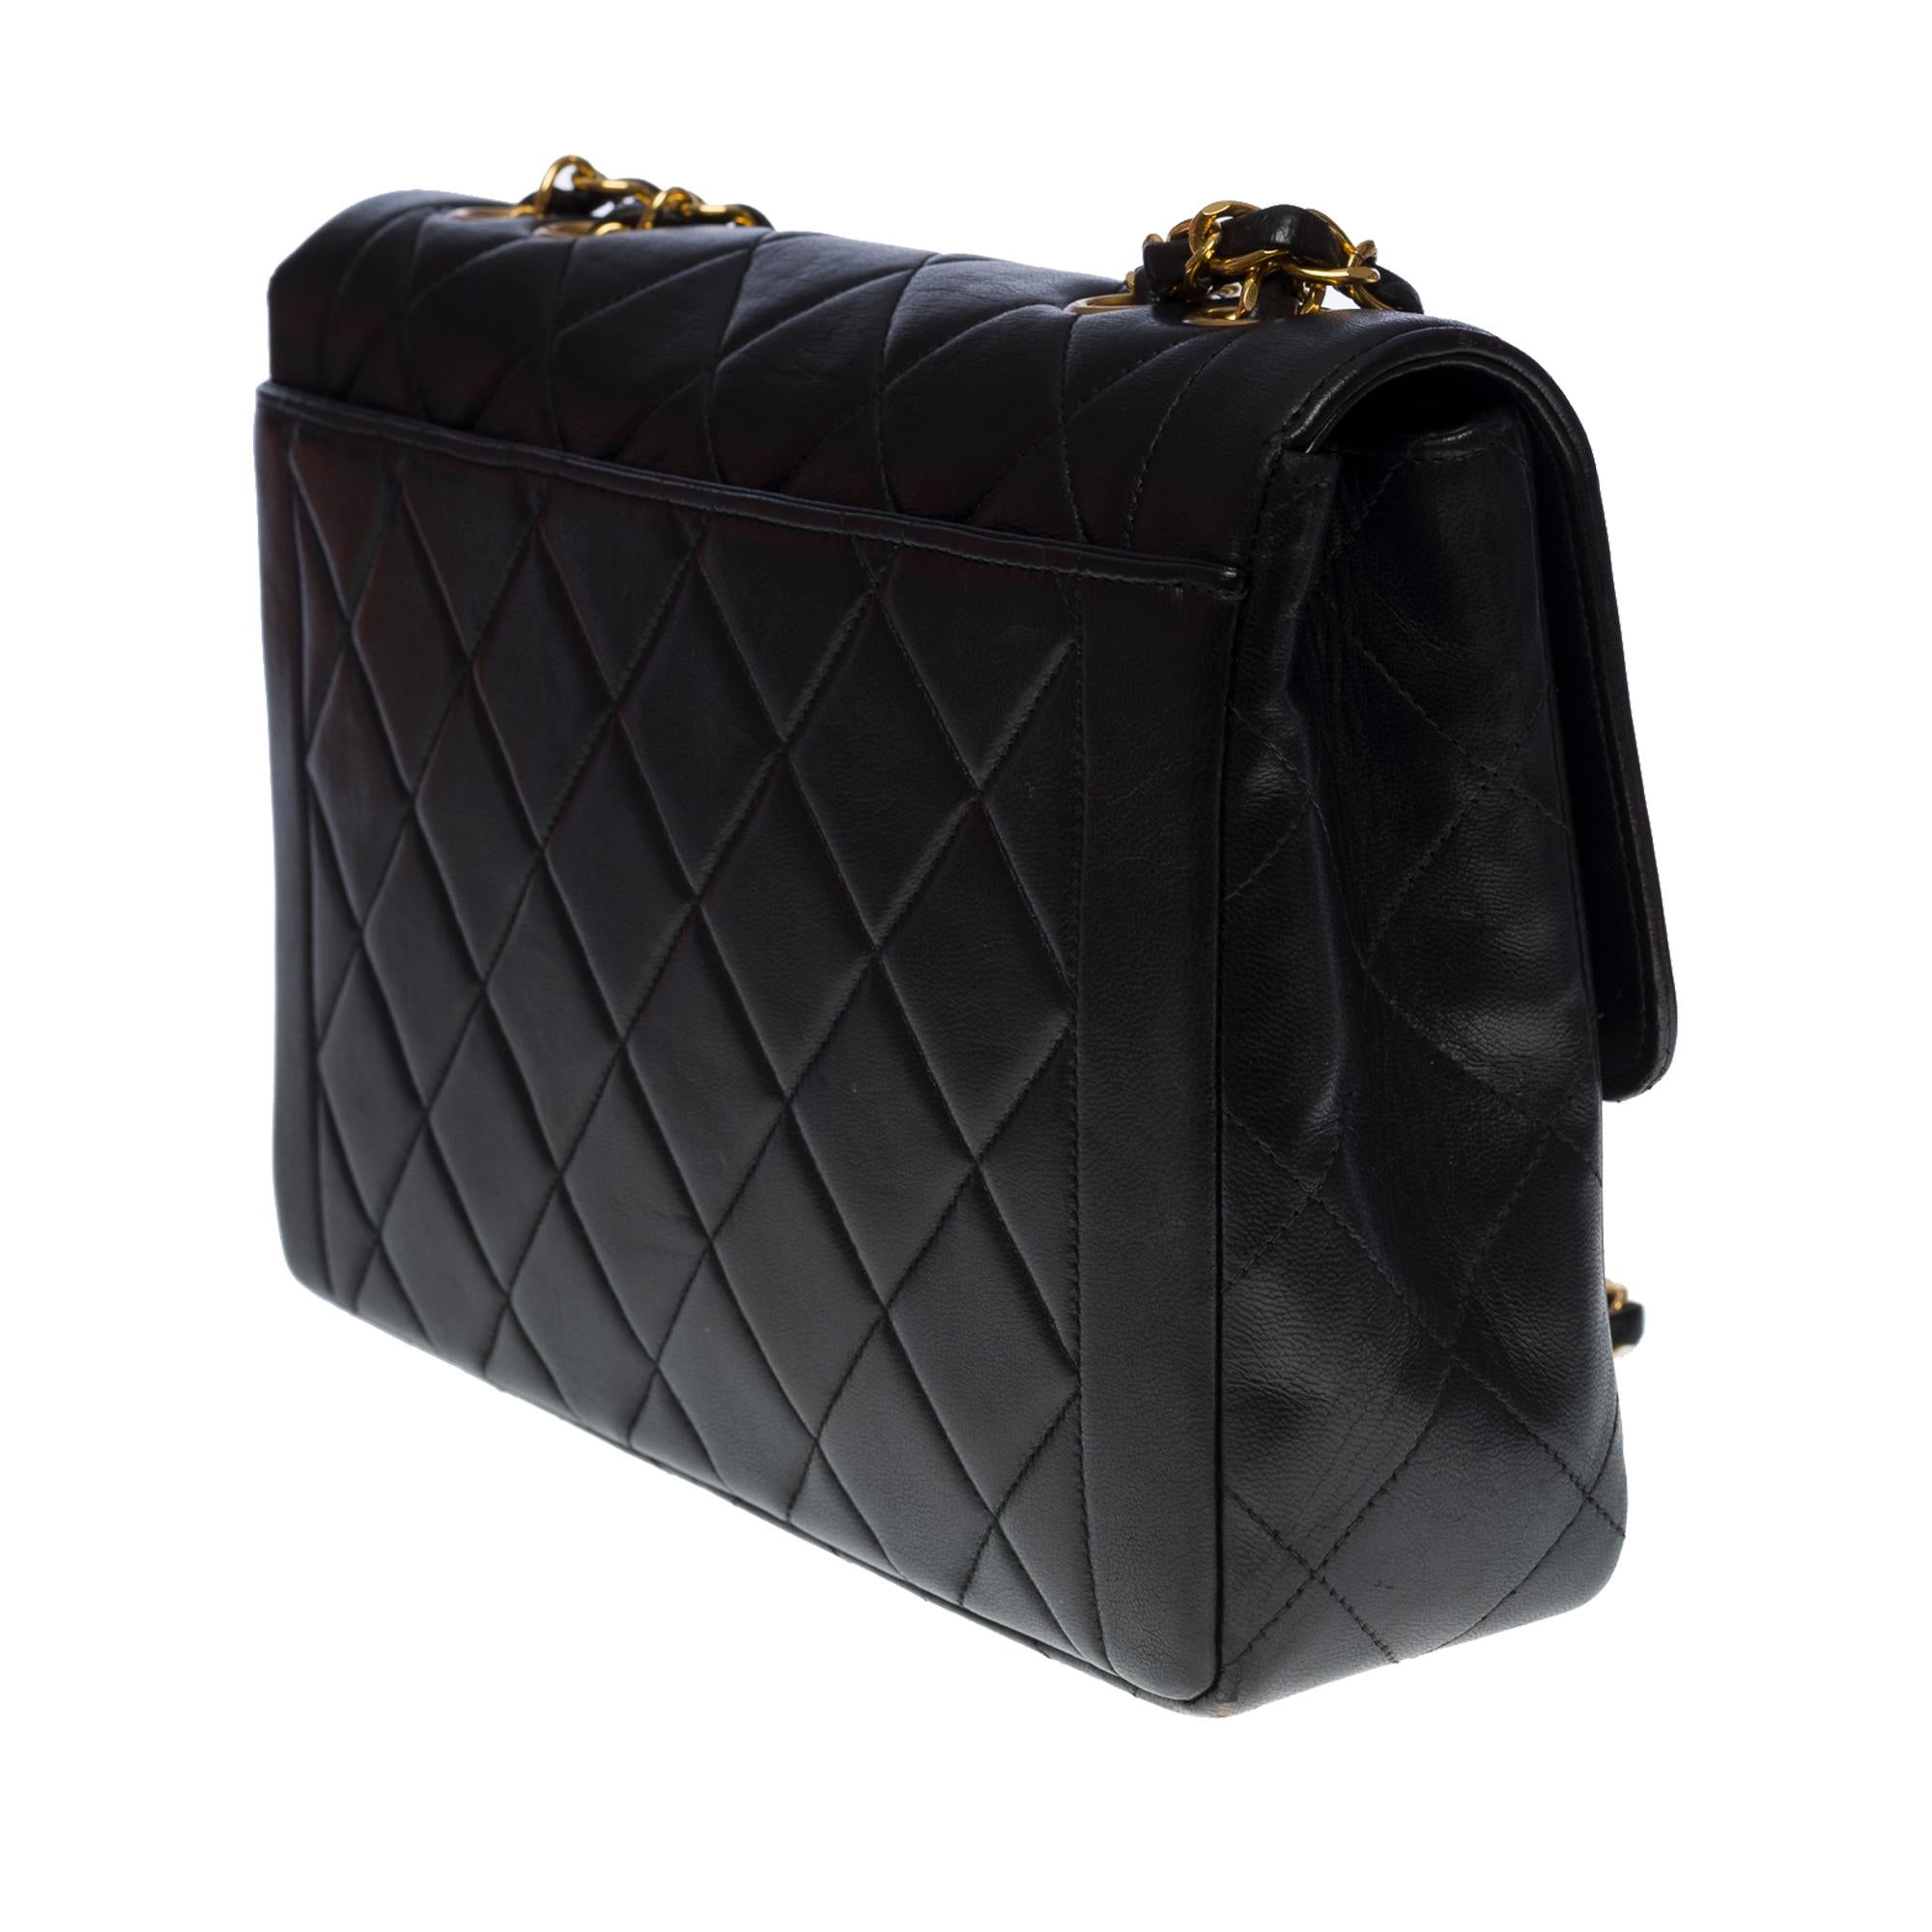 Women's Chanel Timeless/Classic double Flap shoulder bag in black quilted lambskin, GHW